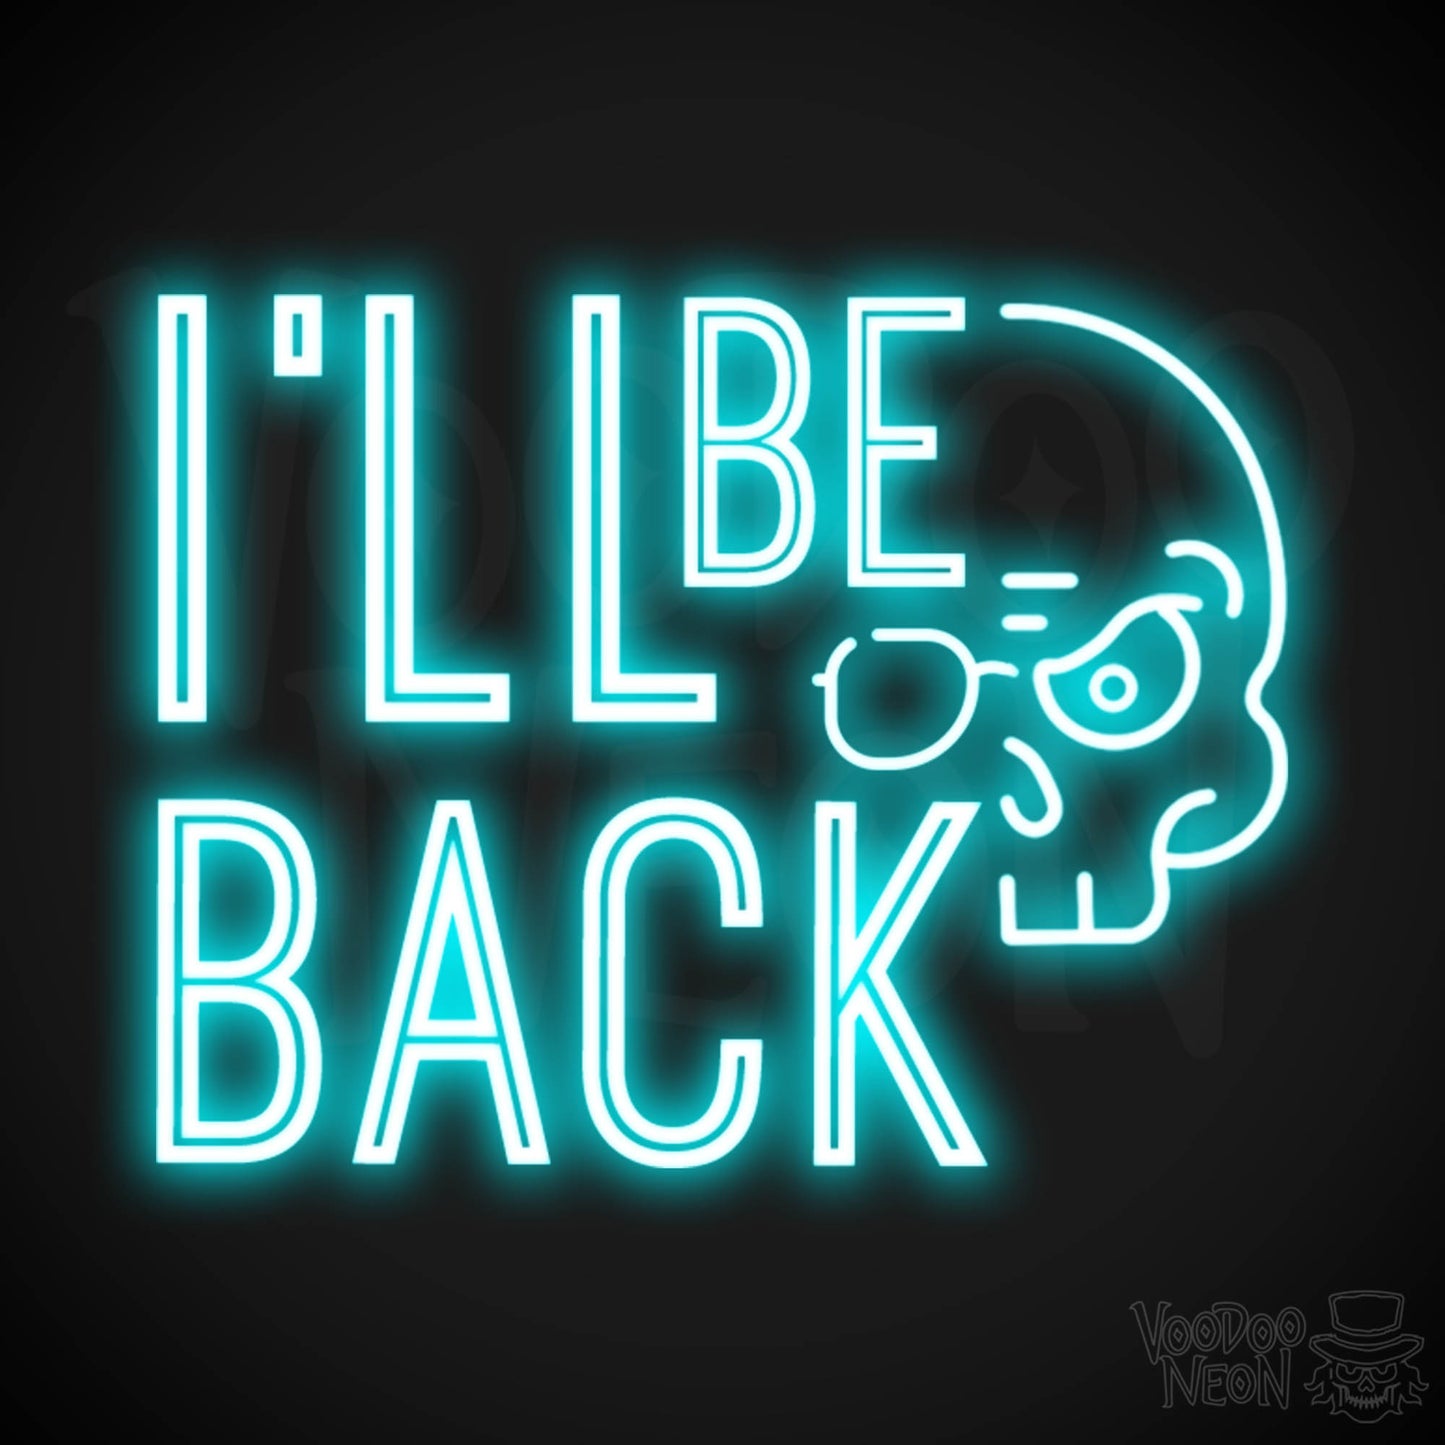 I'll Be Back Neon Sign - Neon I'll Be Back Sign - Light Up Sign Wall Art - Color Ice Blue